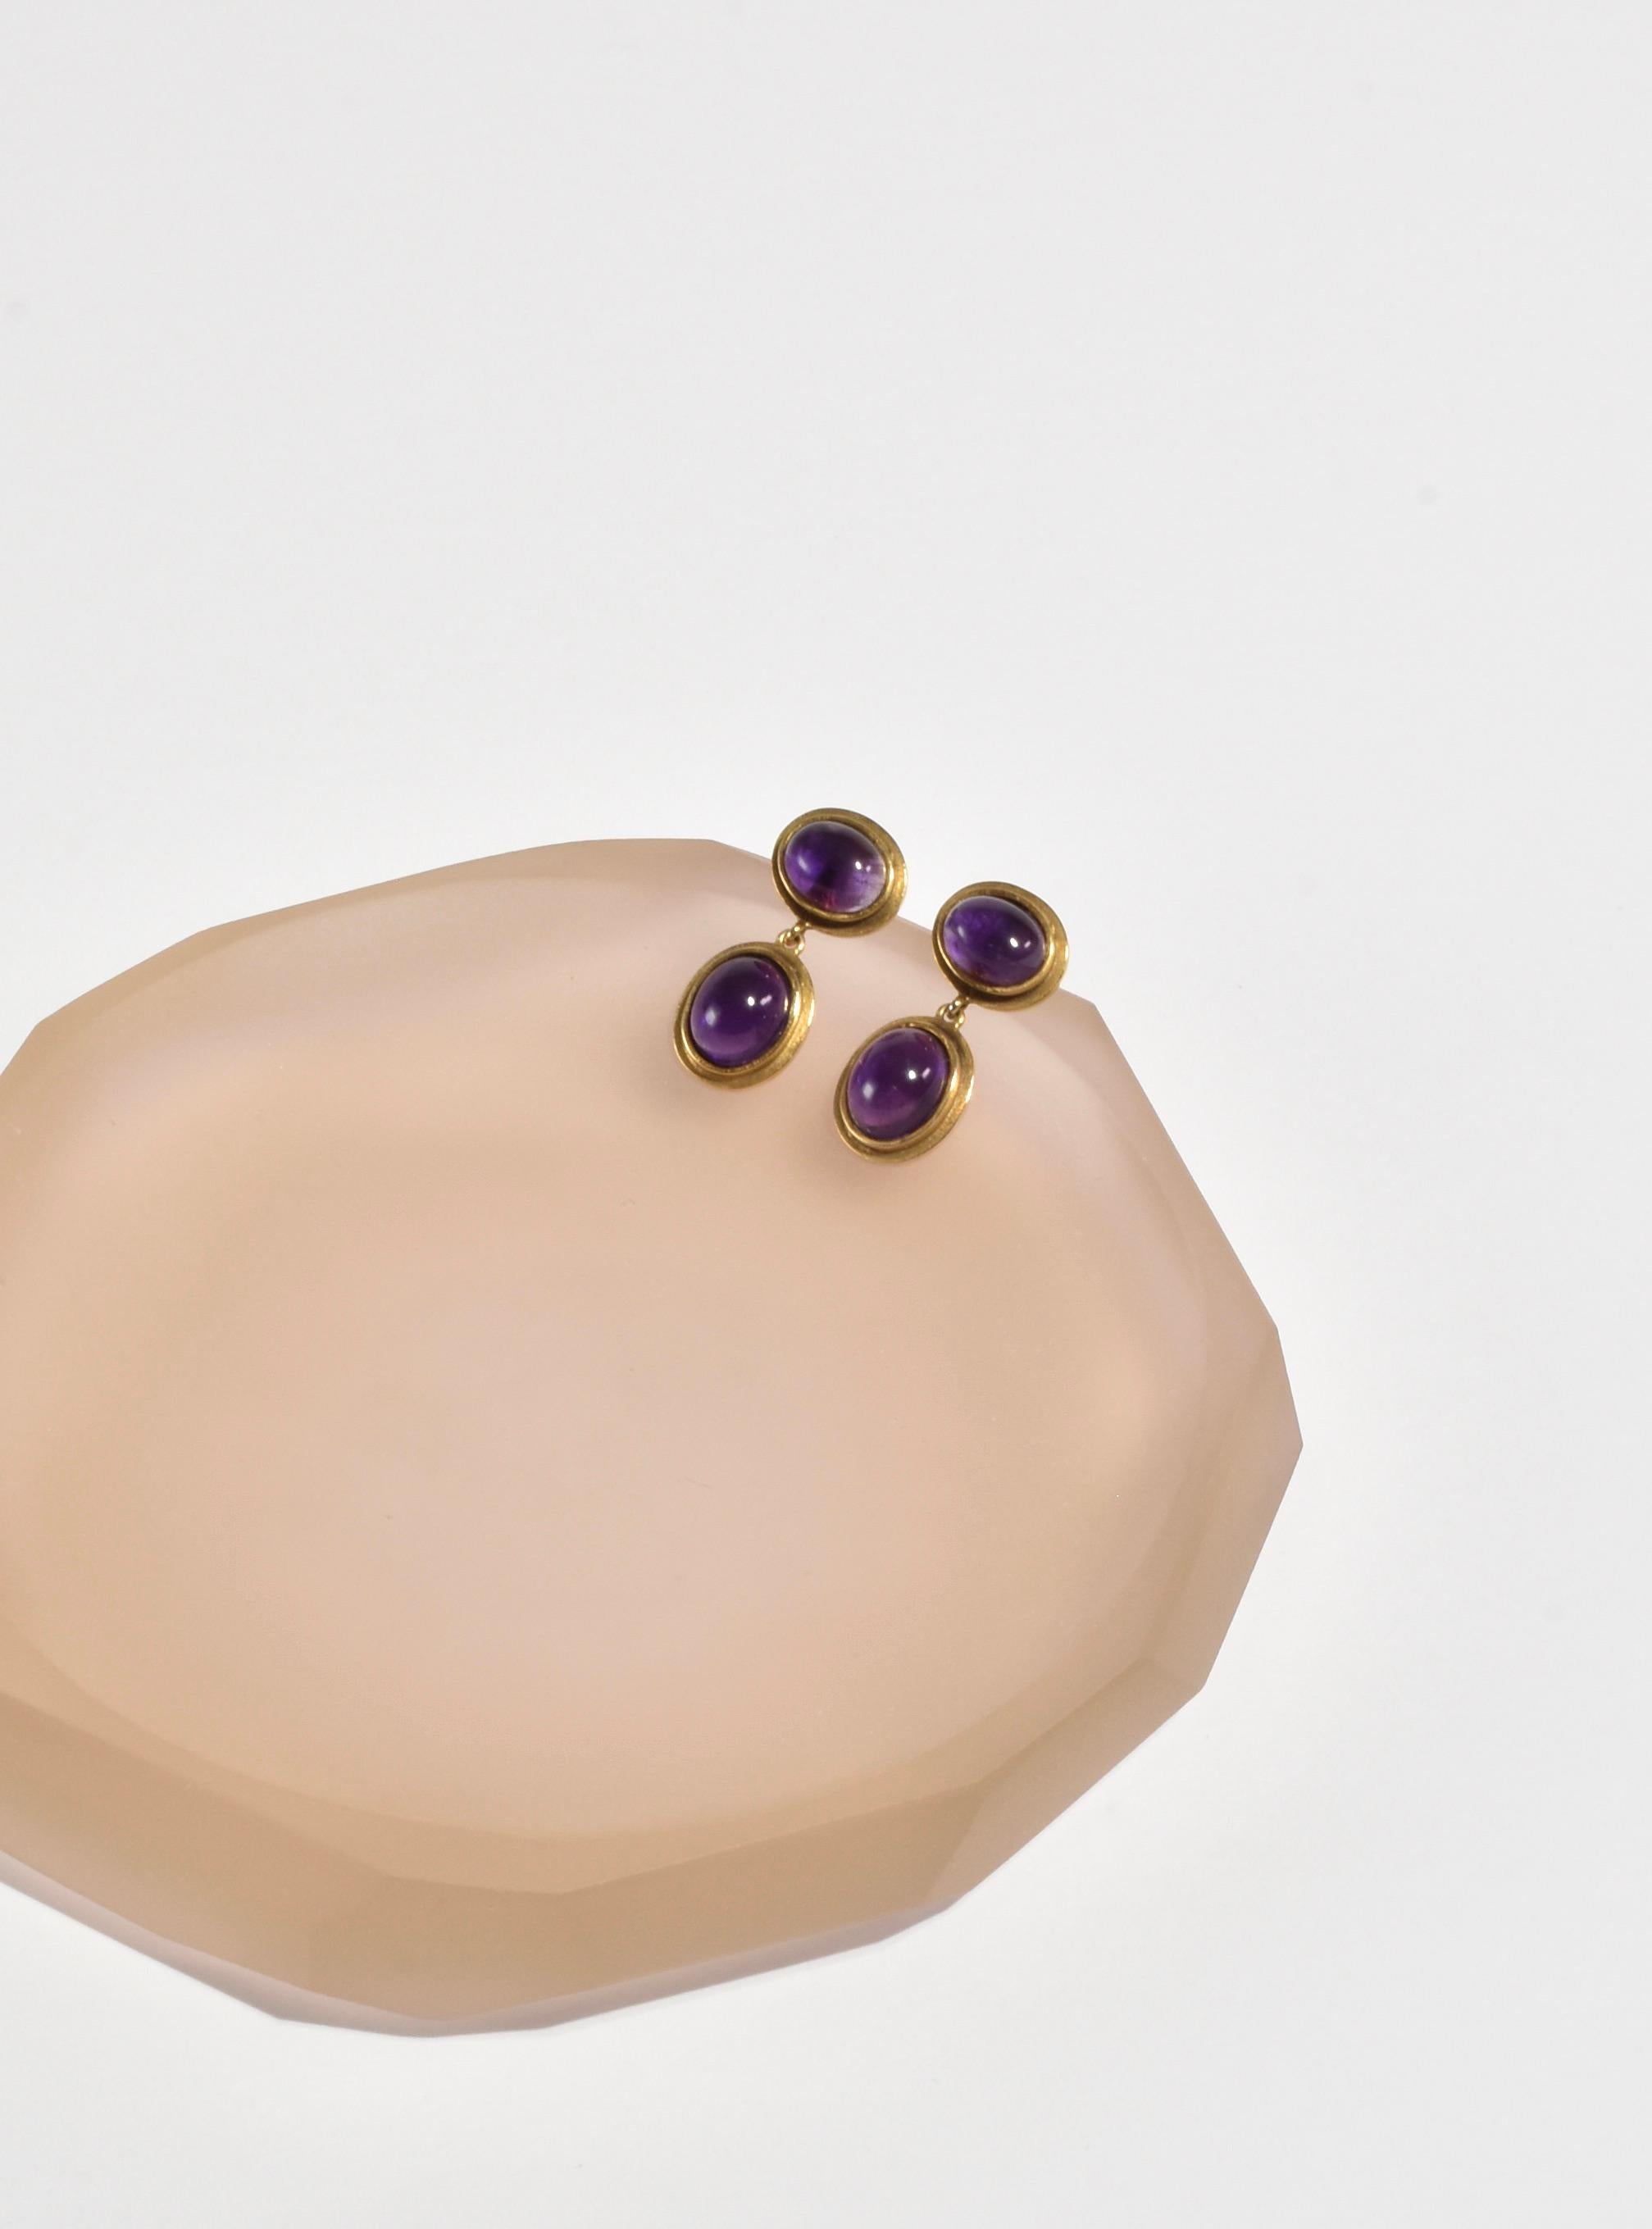 Cabochon Gold Amethyst Dome Earrings